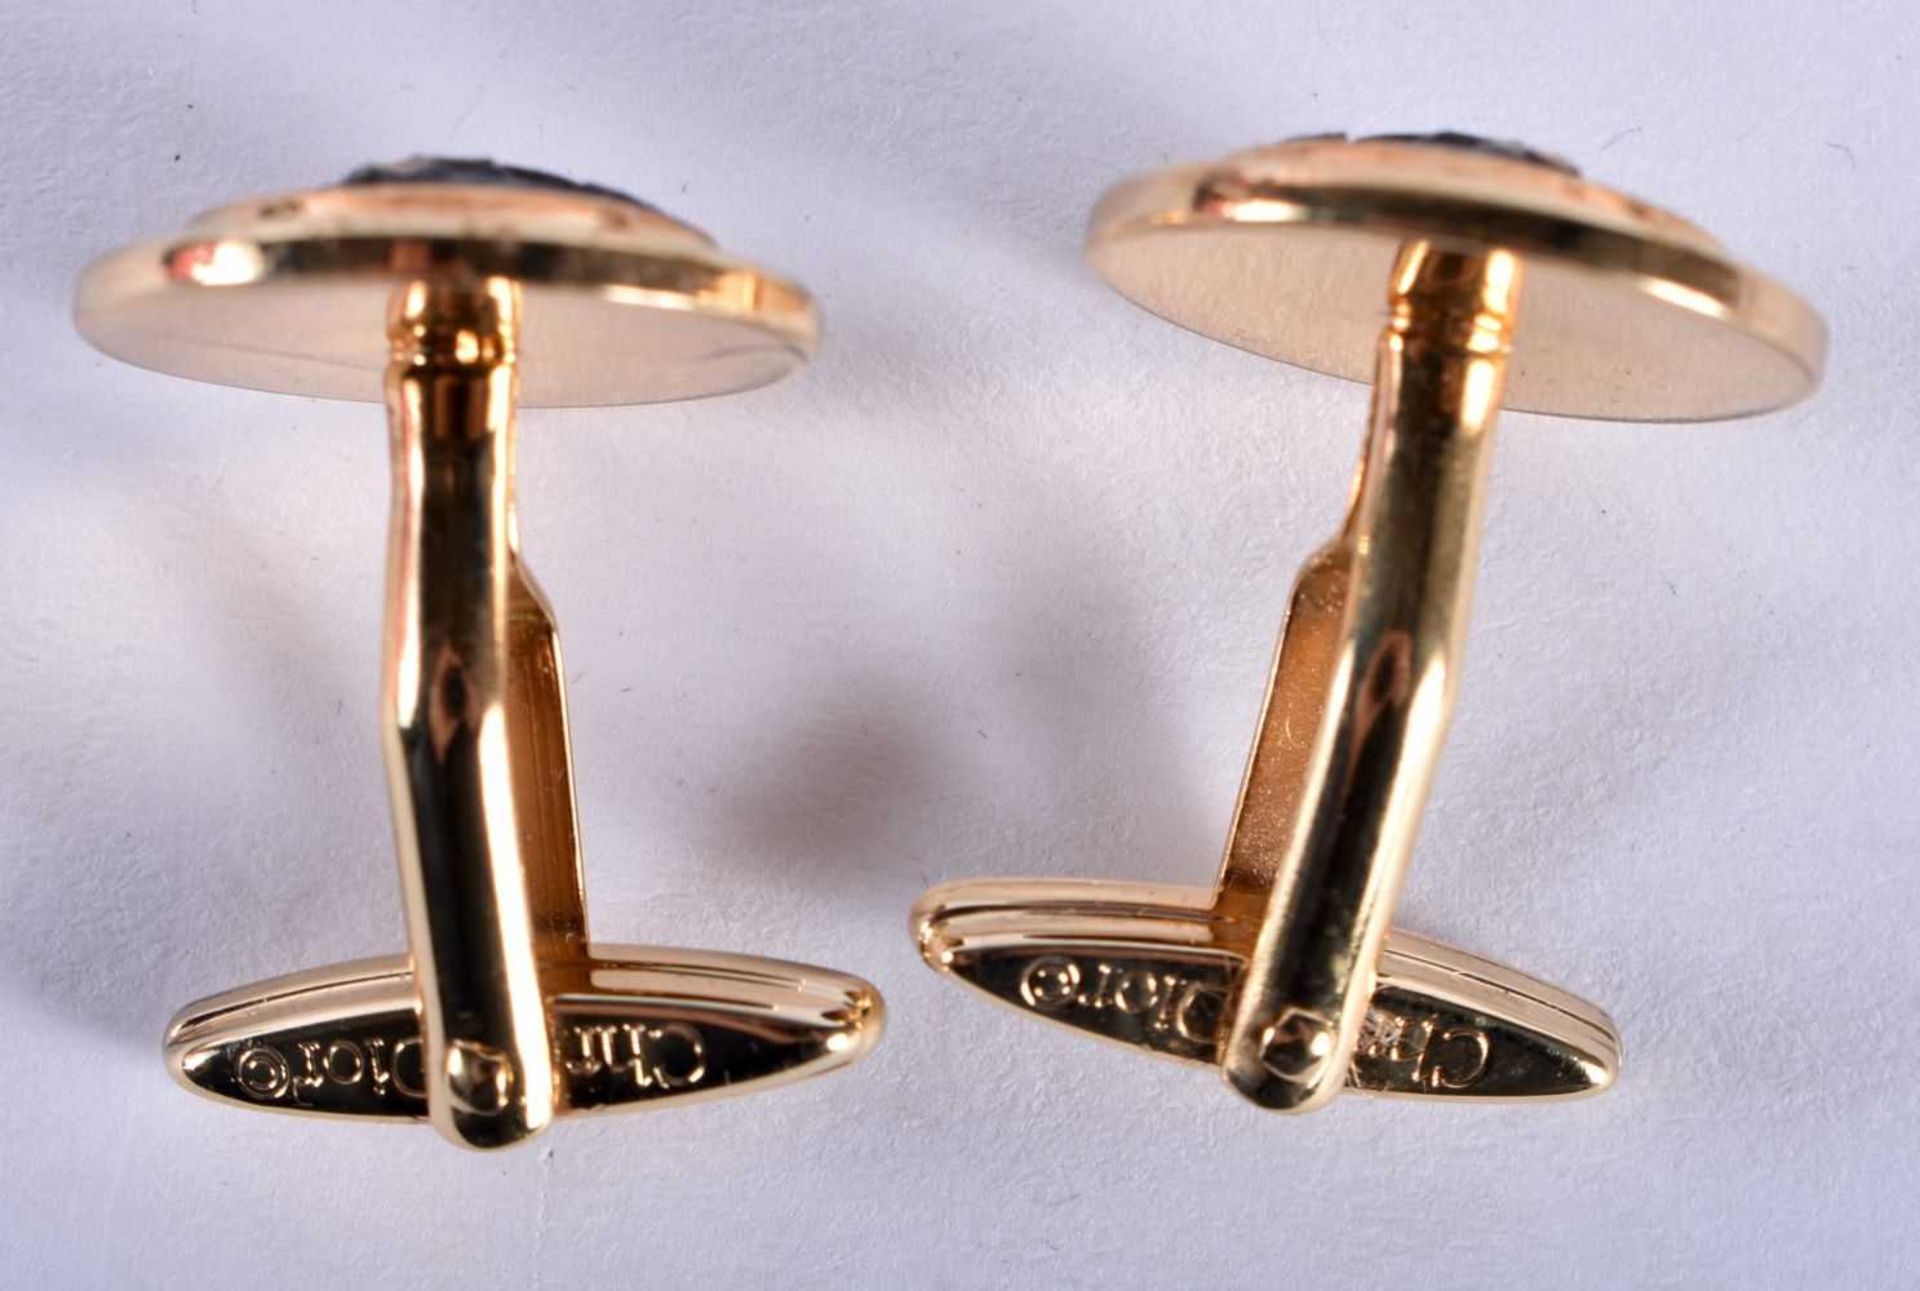 A pair of gold tone enamel cufflinks by Christian Dior (15g) - Image 4 of 4